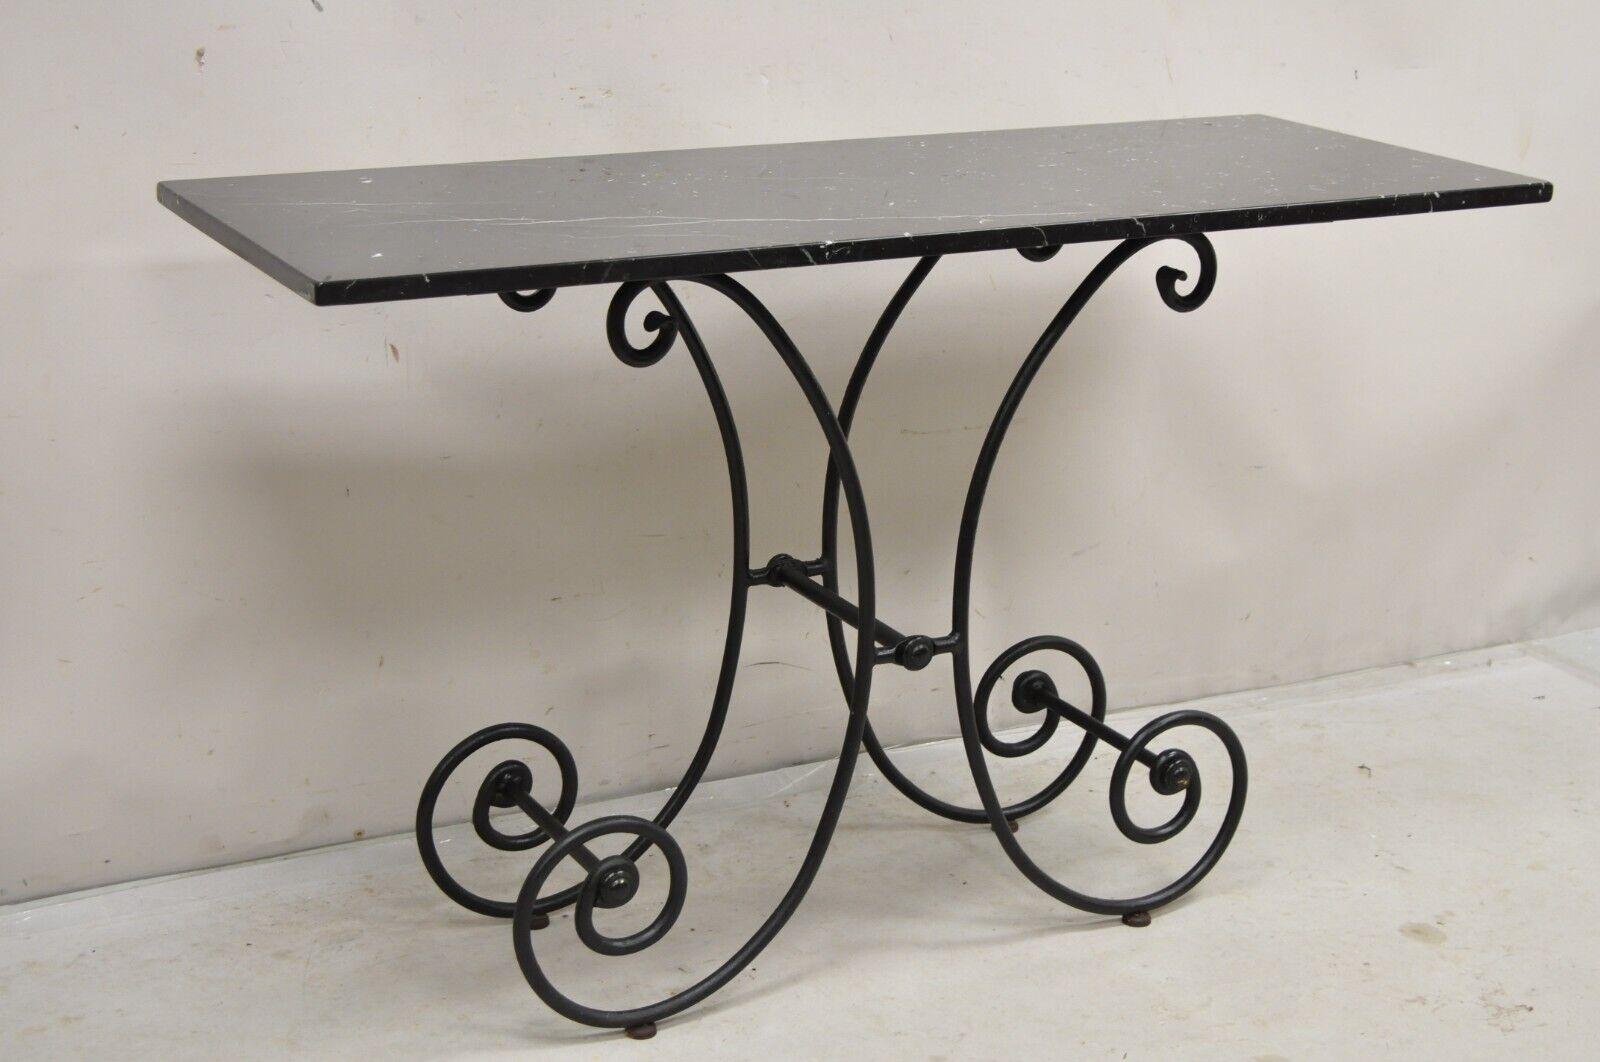 Vintage French Country Pastry Style Scrolling Wrought Iron Black Marble Top Bakers's Console Table. Circa Early to Mid 20th Century
Measurements: 30